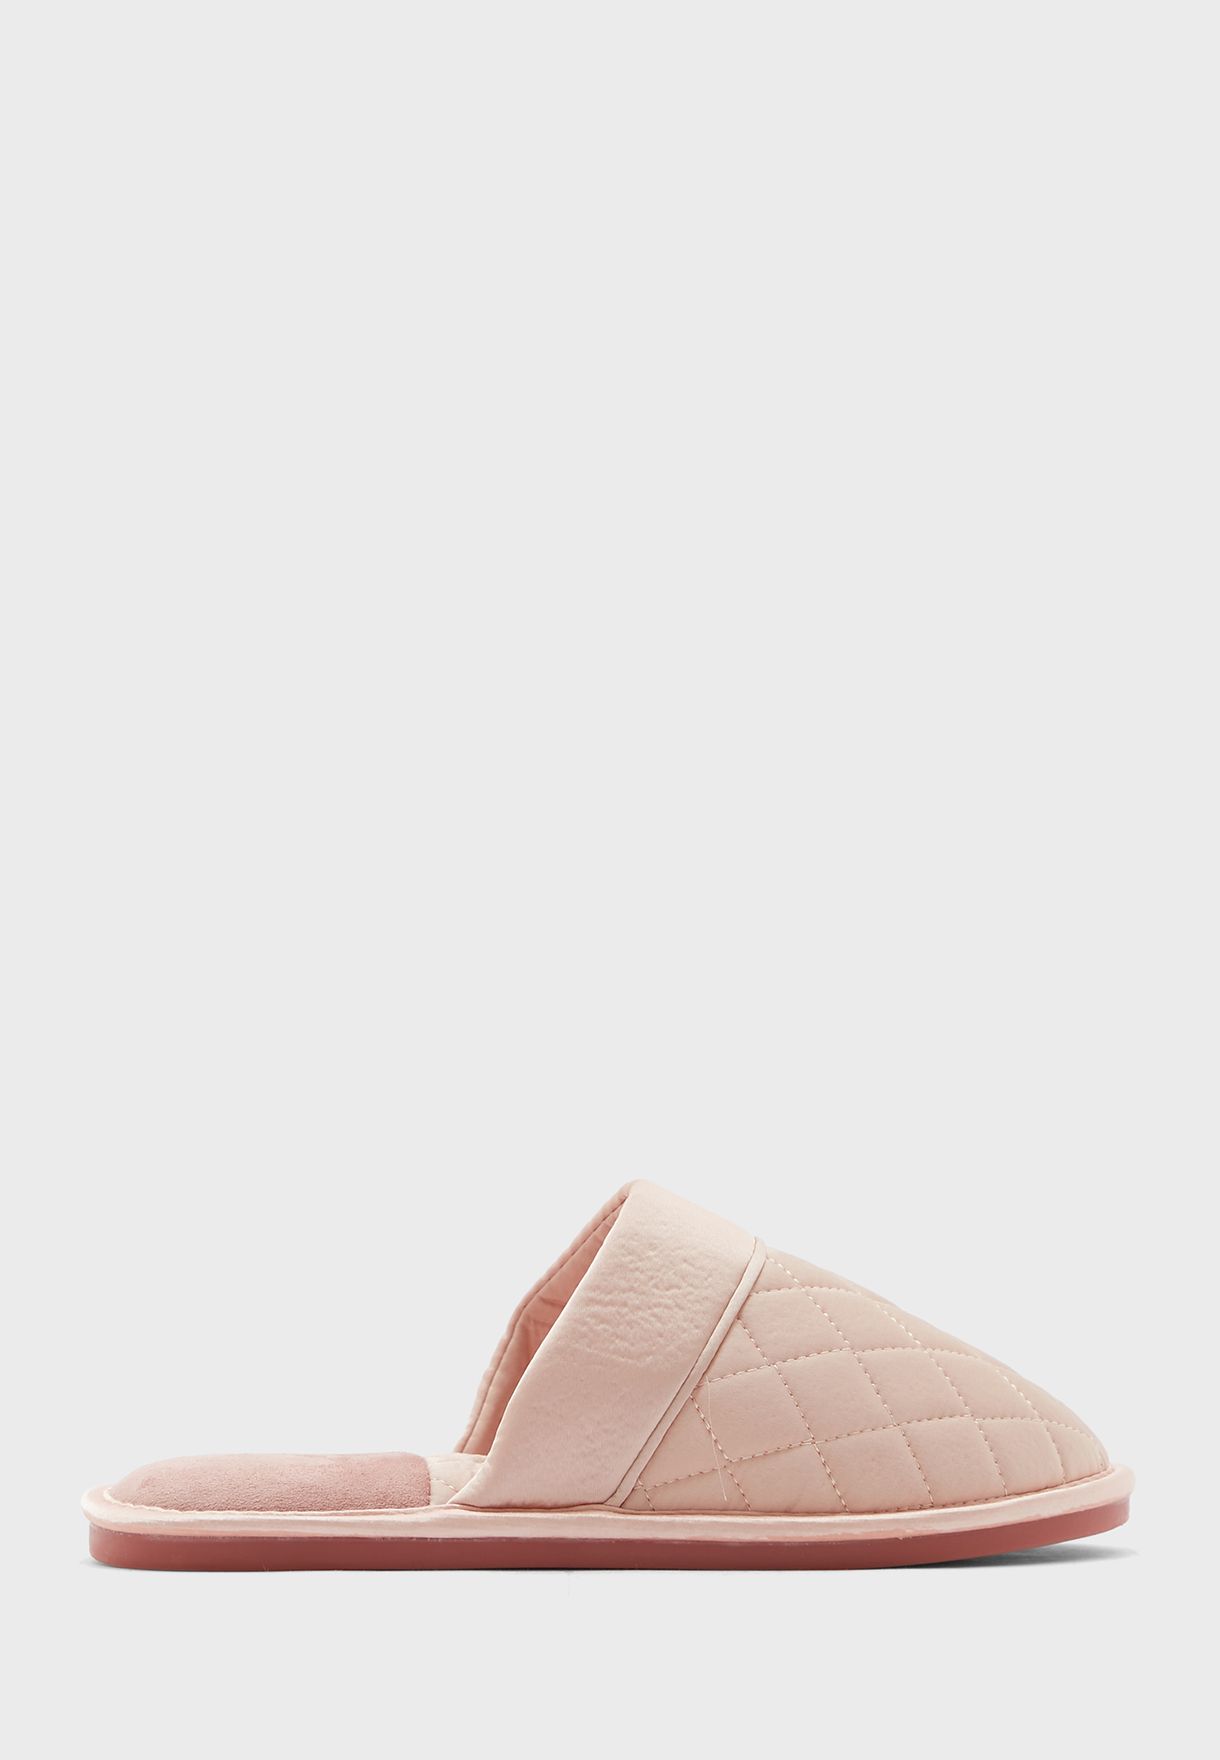 Quilted Satin Bedroom Slippers 